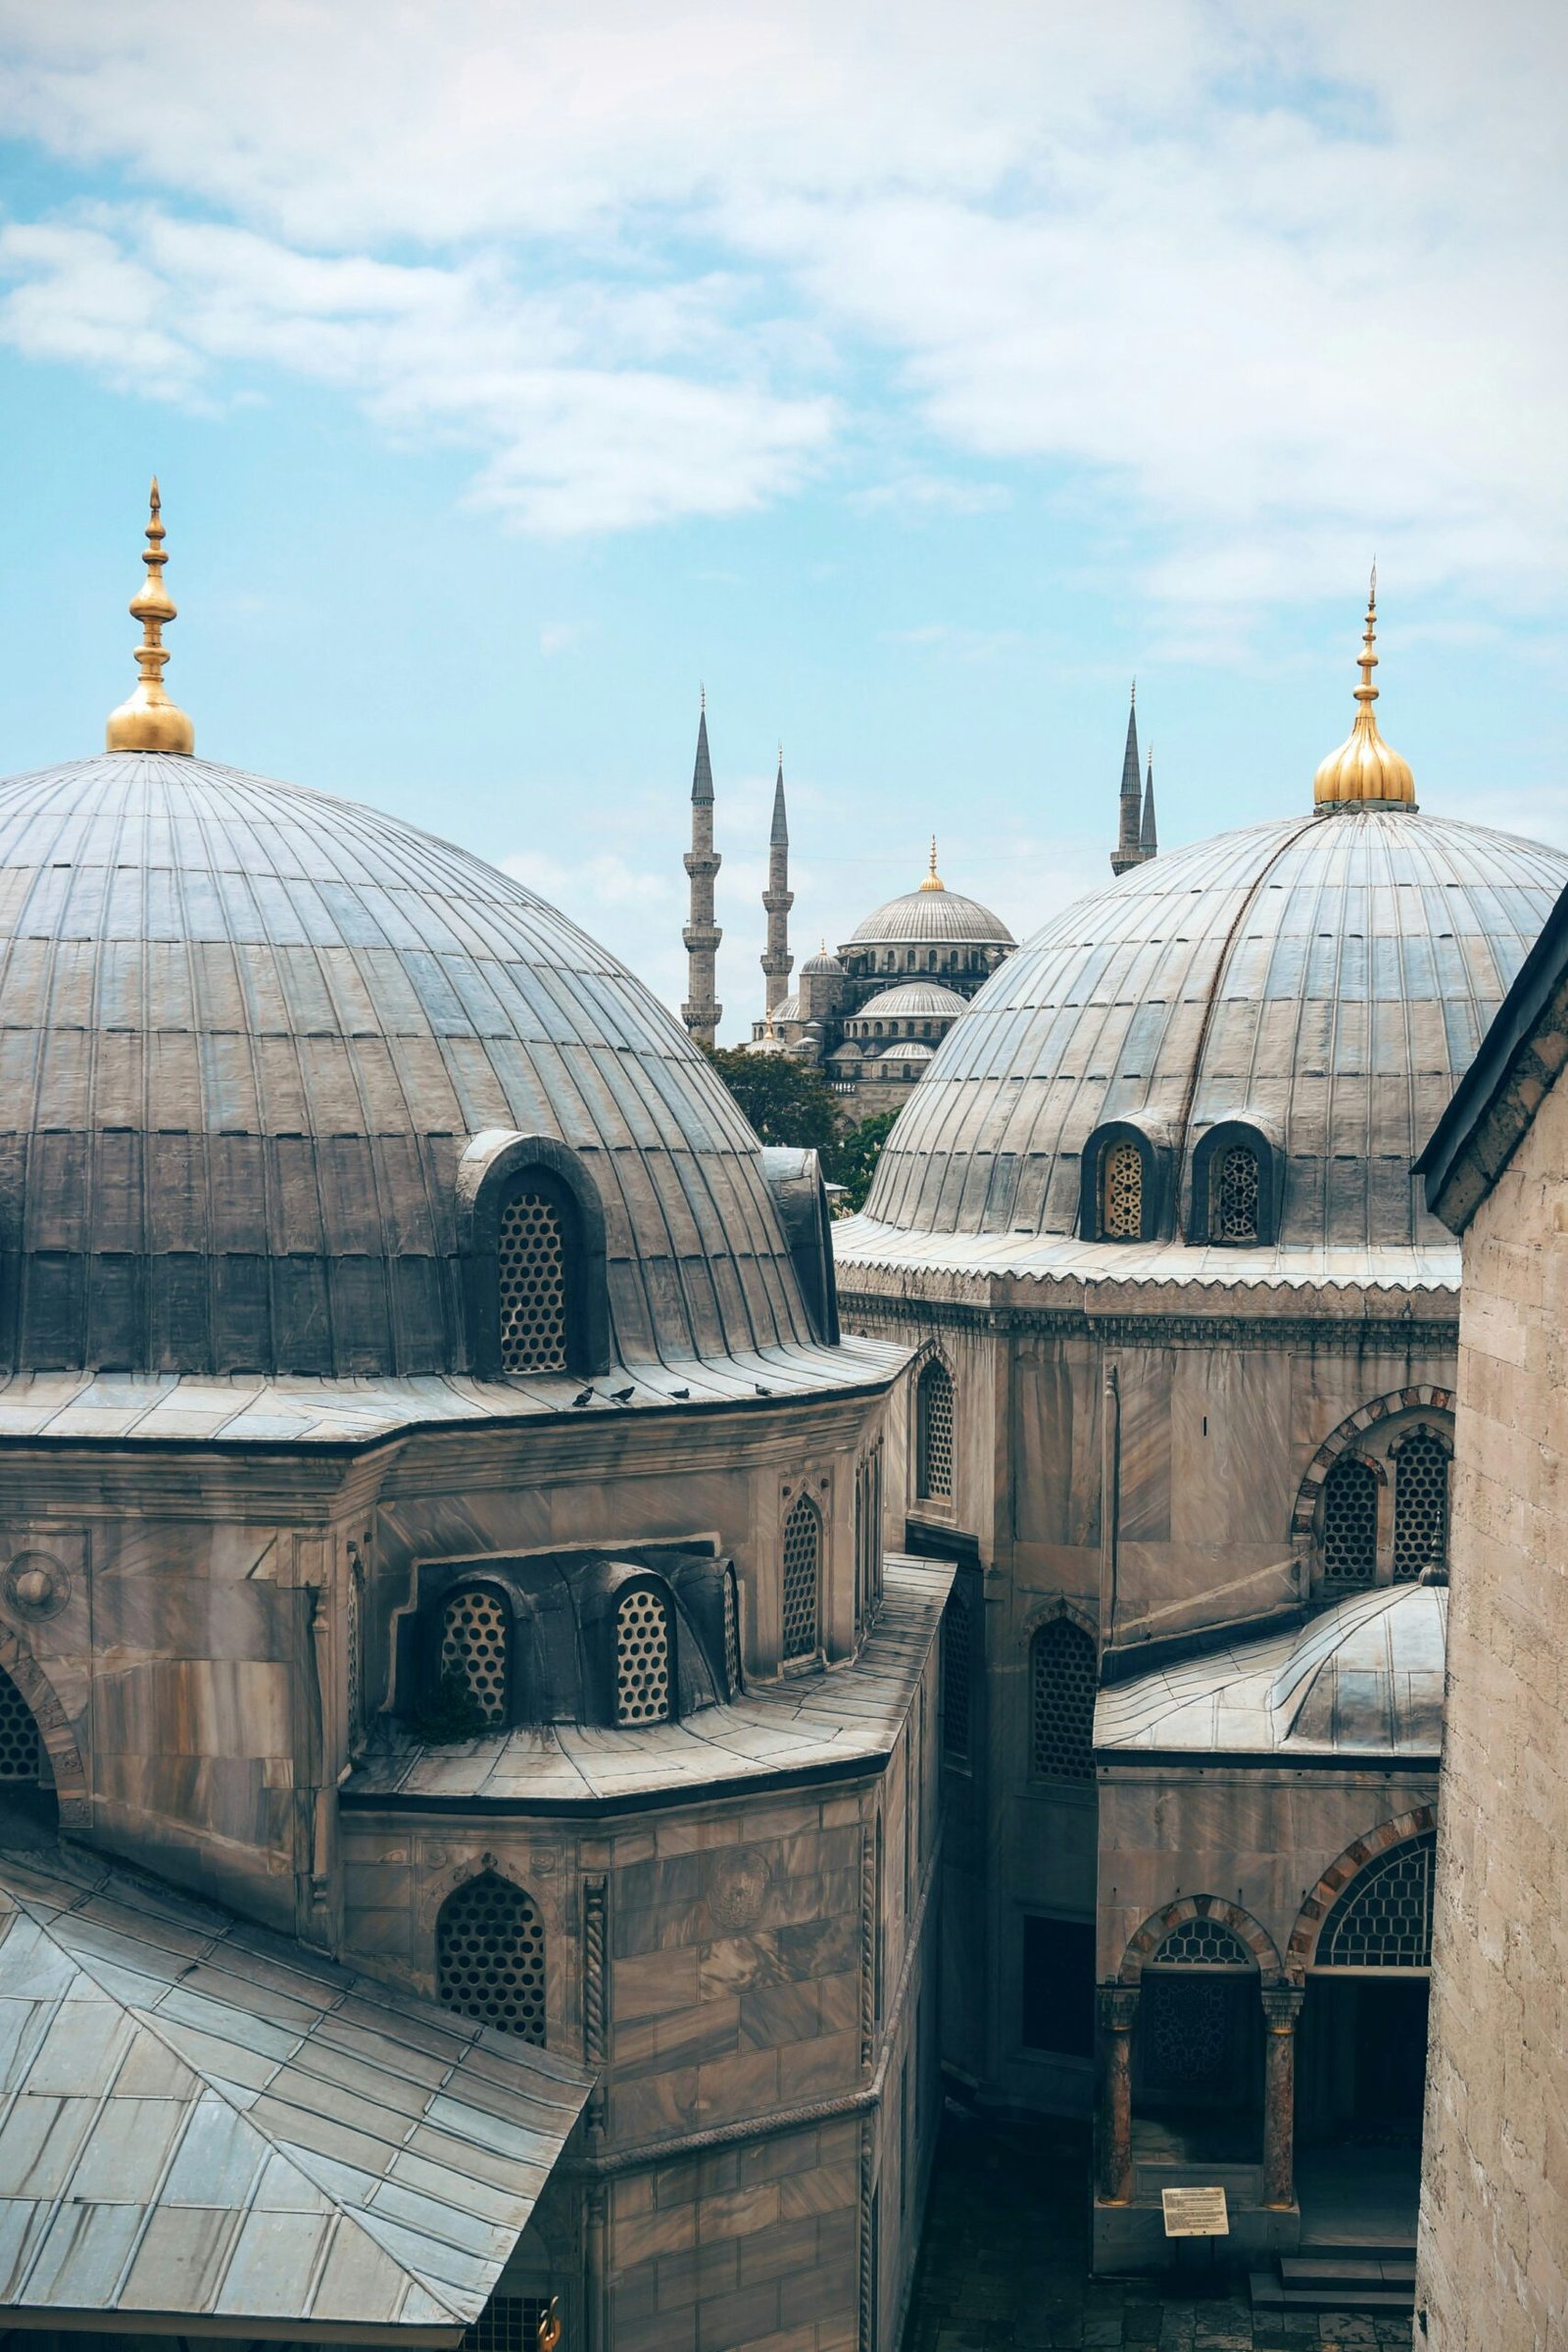 “The Conquest of Istanbul: A Historic Turning Point”